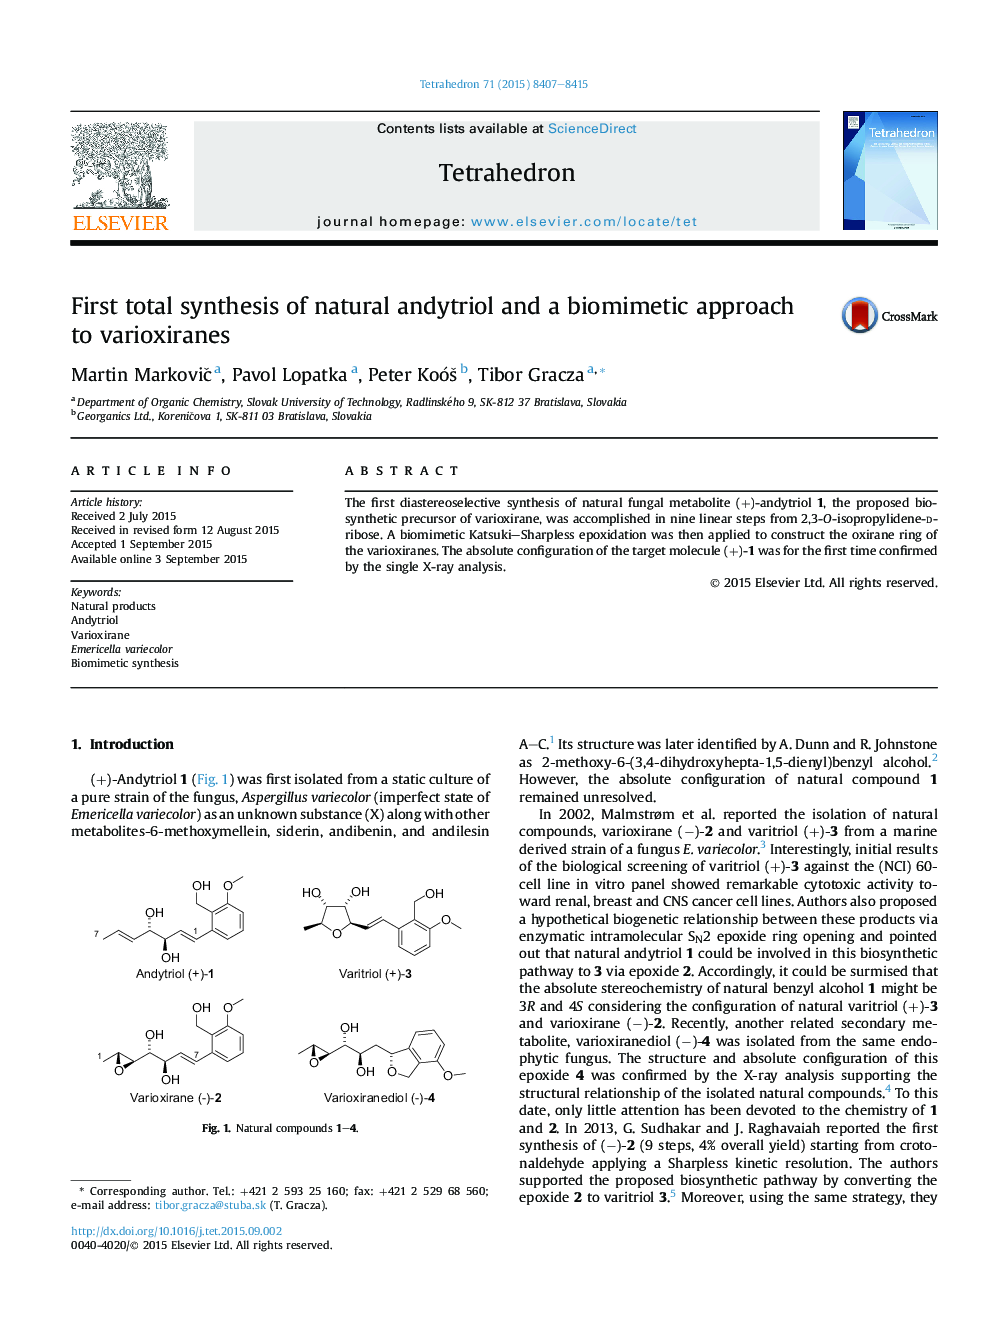 First total synthesis of natural andytriol and a biomimetic approach to varioxiranes